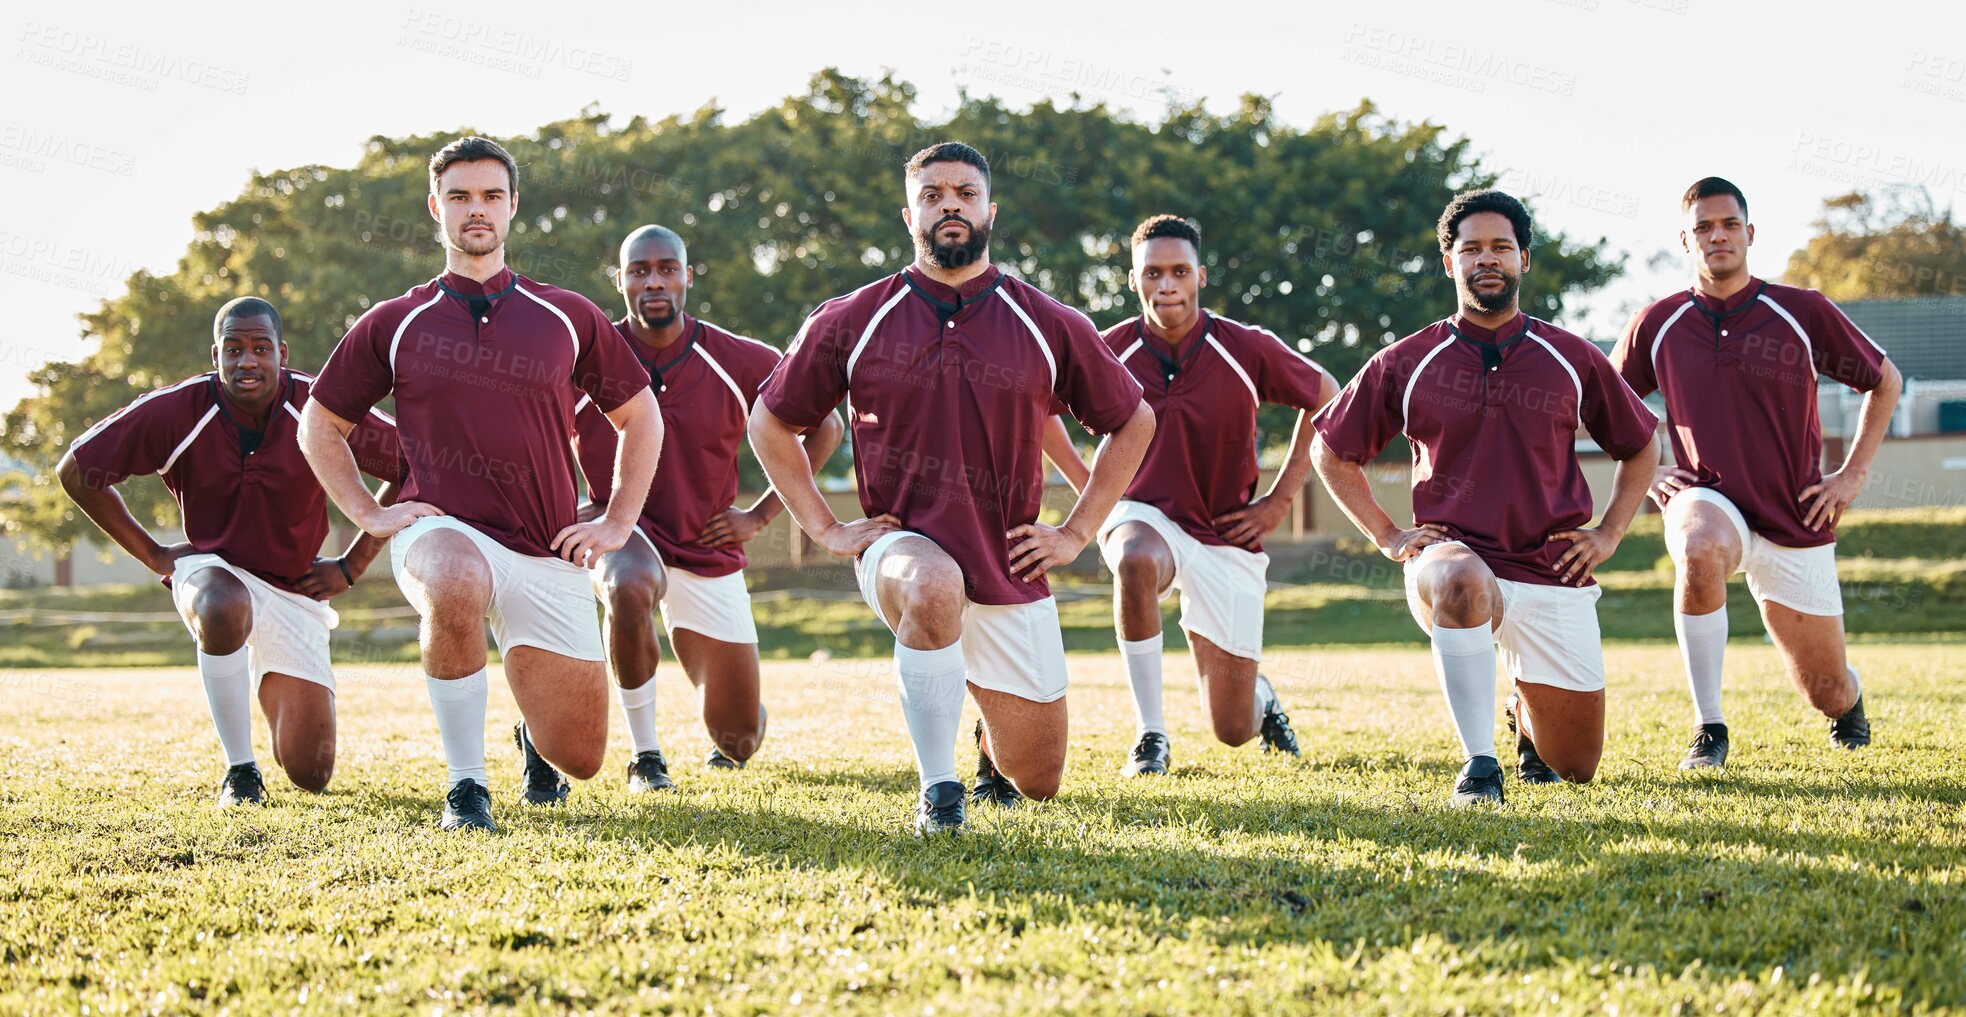 Buy stock photo Rugby, sports and a team of men portrait doing lunges for training or competition game on a field. Fitness, sport and stretching with diversity athlete group in a warm up before an outdoor match
